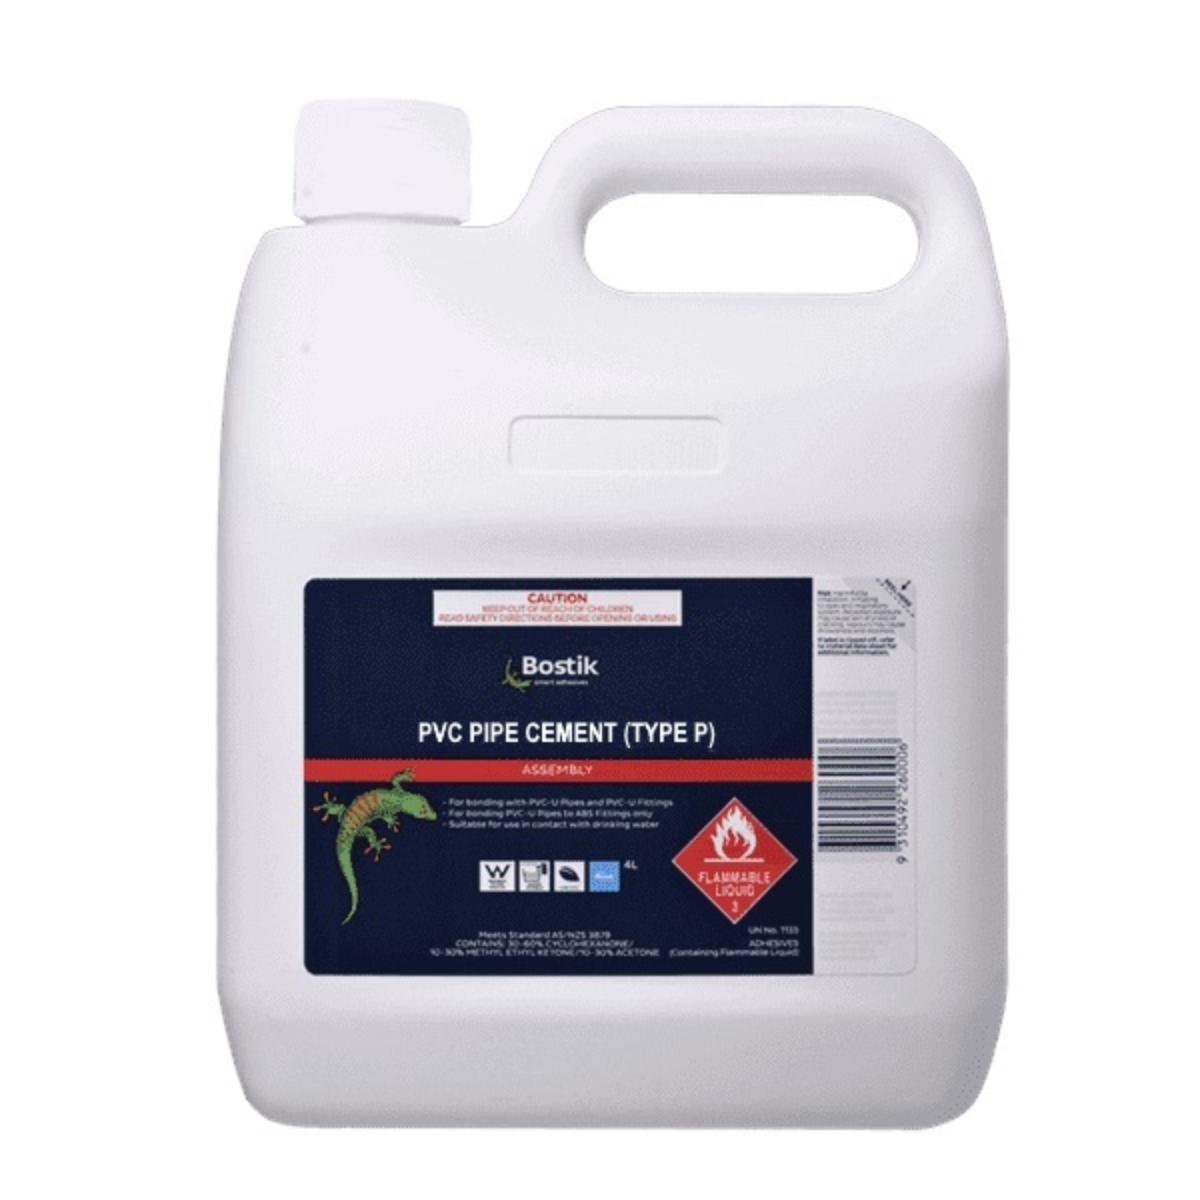 SOLVENT CEMENT CLEAR 4LT